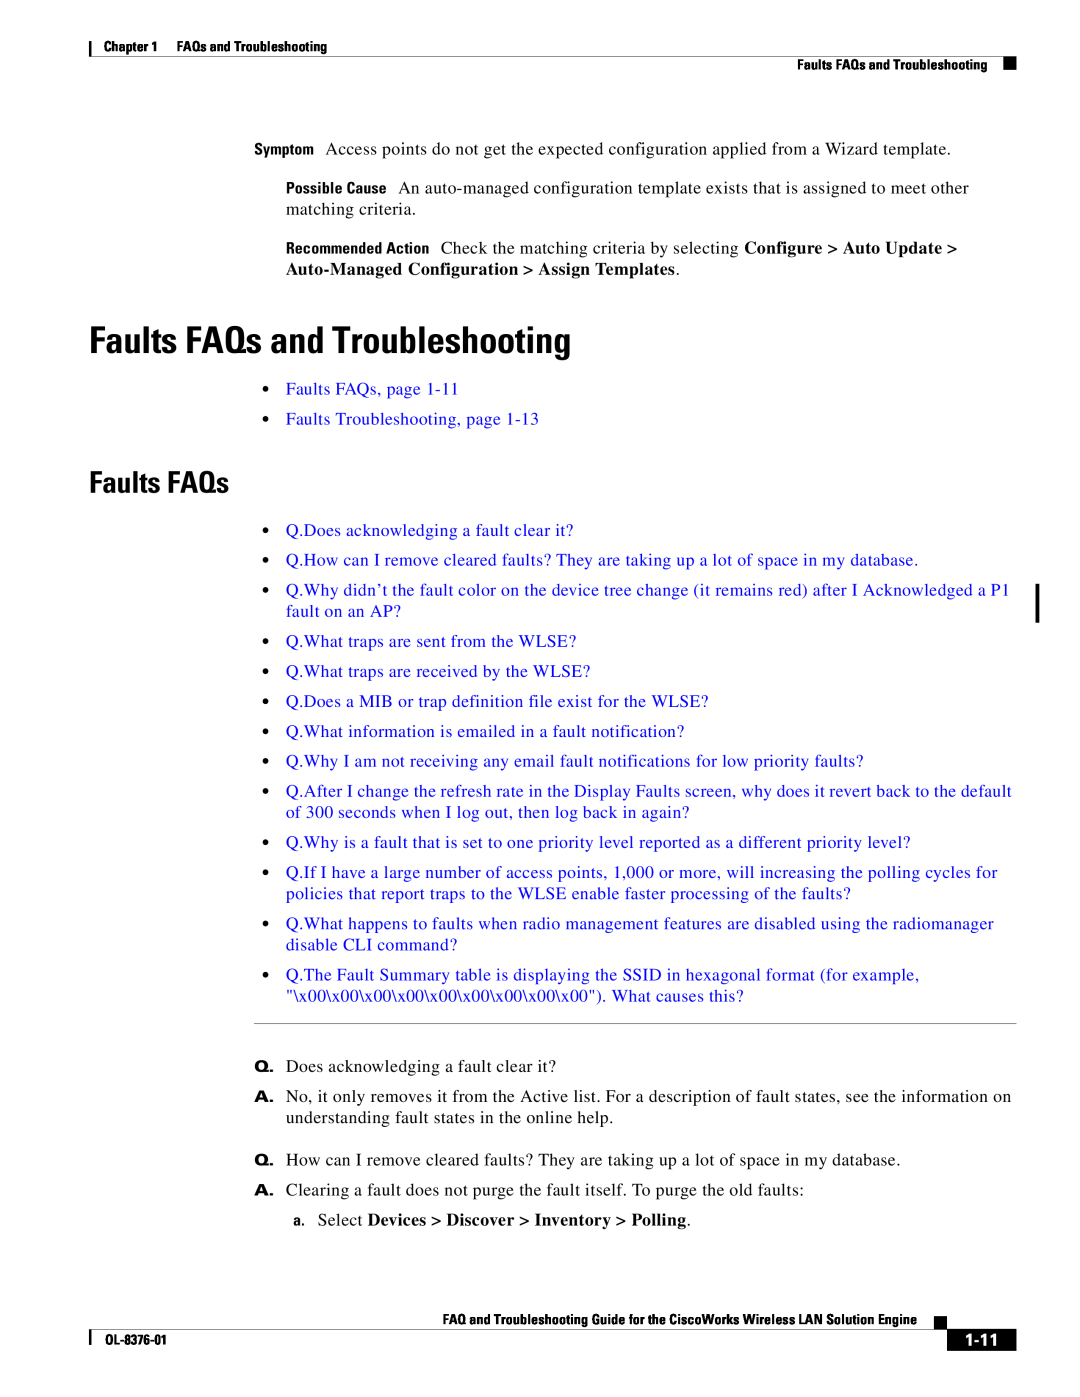 Cisco Systems OL-8376-01 manual Faults FAQs and Troubleshooting, Auto-ManagedConfiguration > Assign Templates, 1-11 